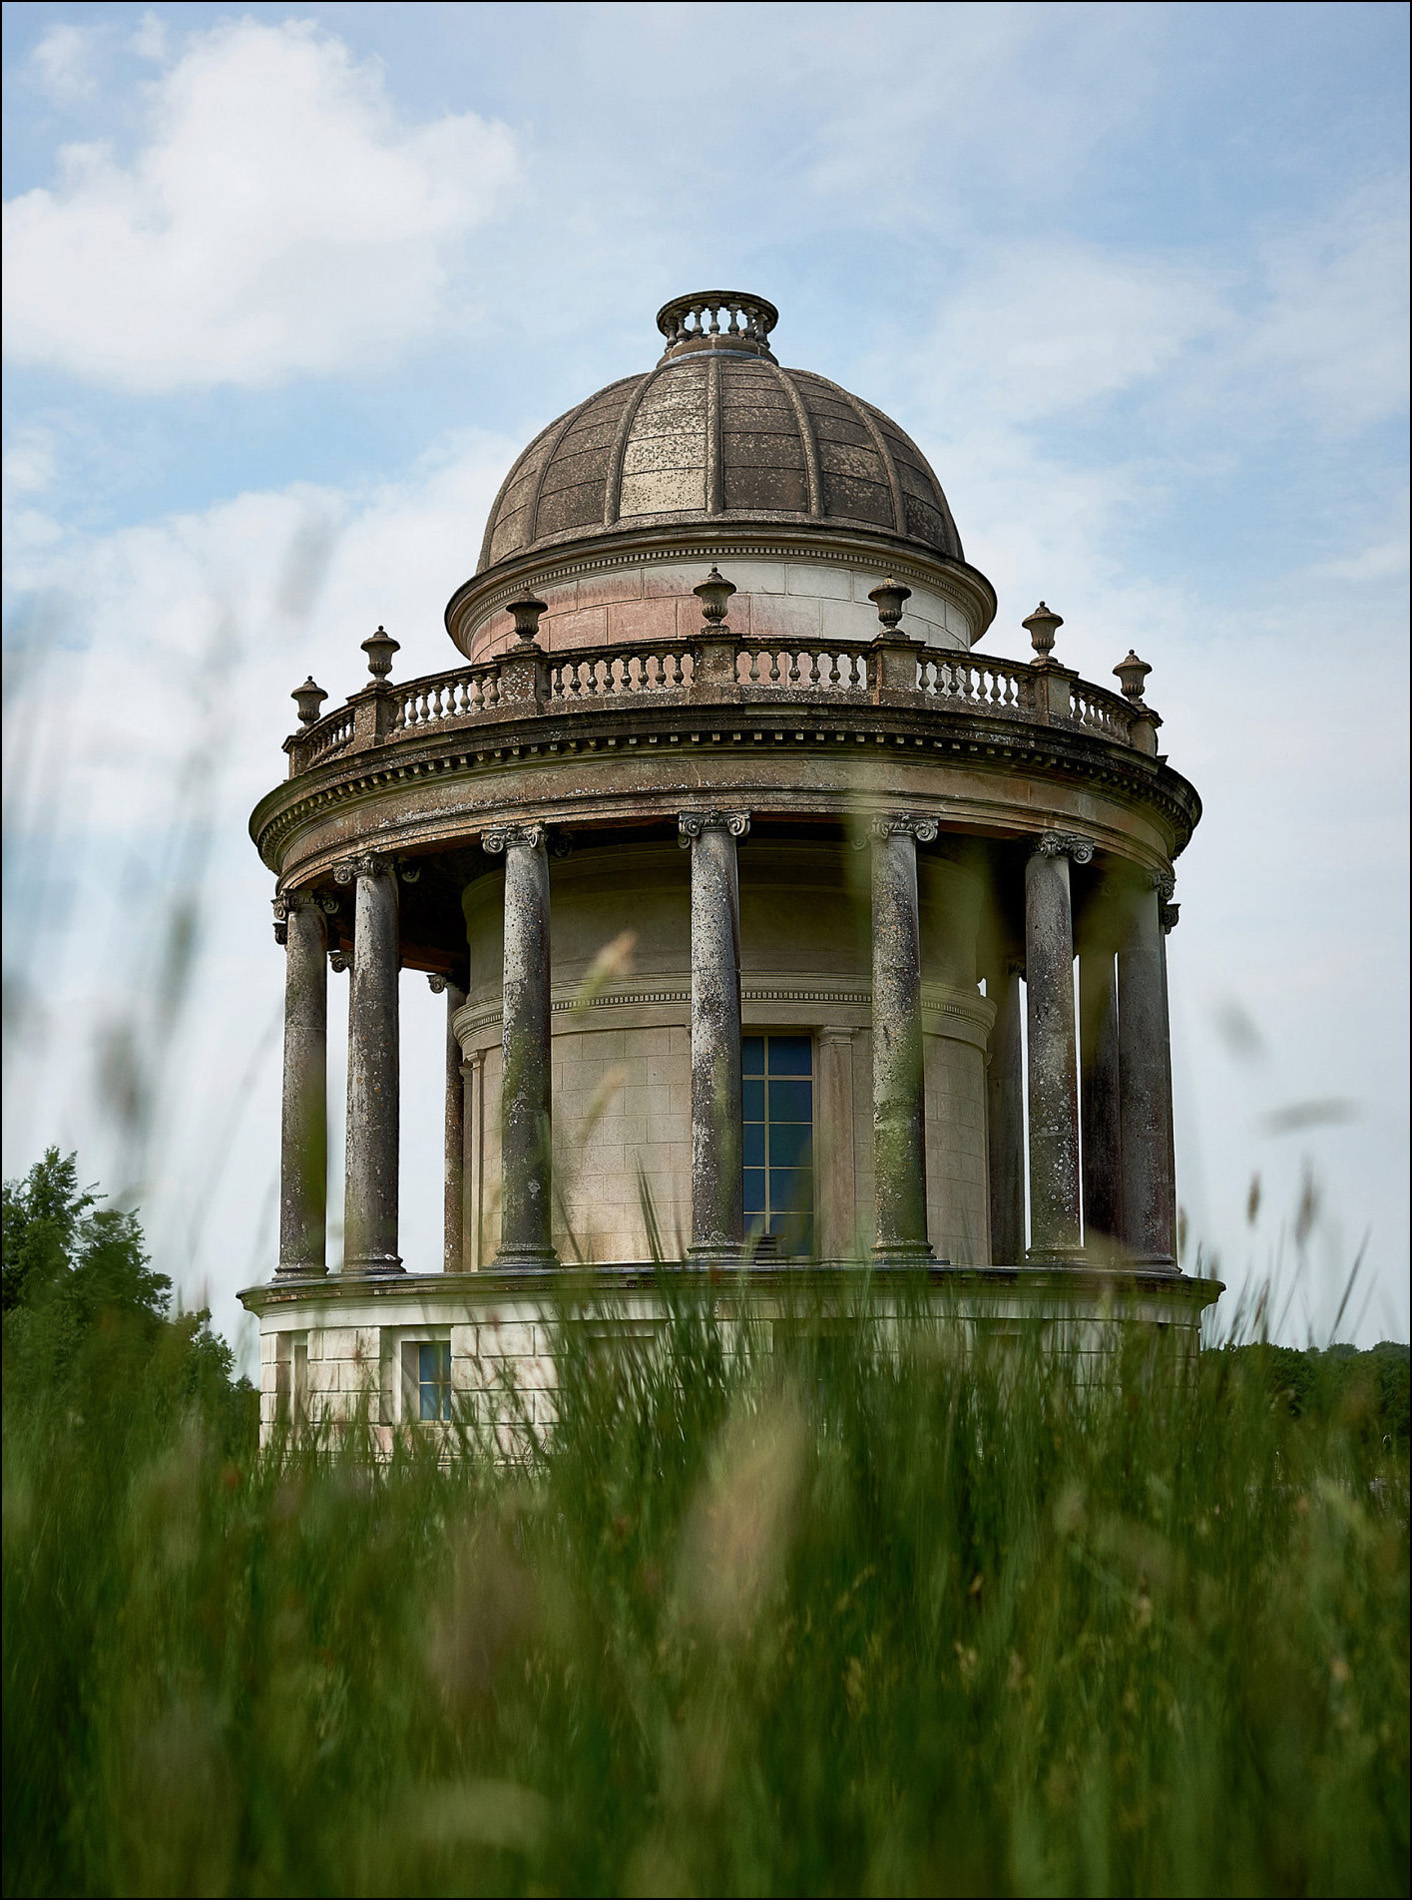 The Temple of Diana today as seen by guests on their arrivalBenjamin Disraeli - photo 9